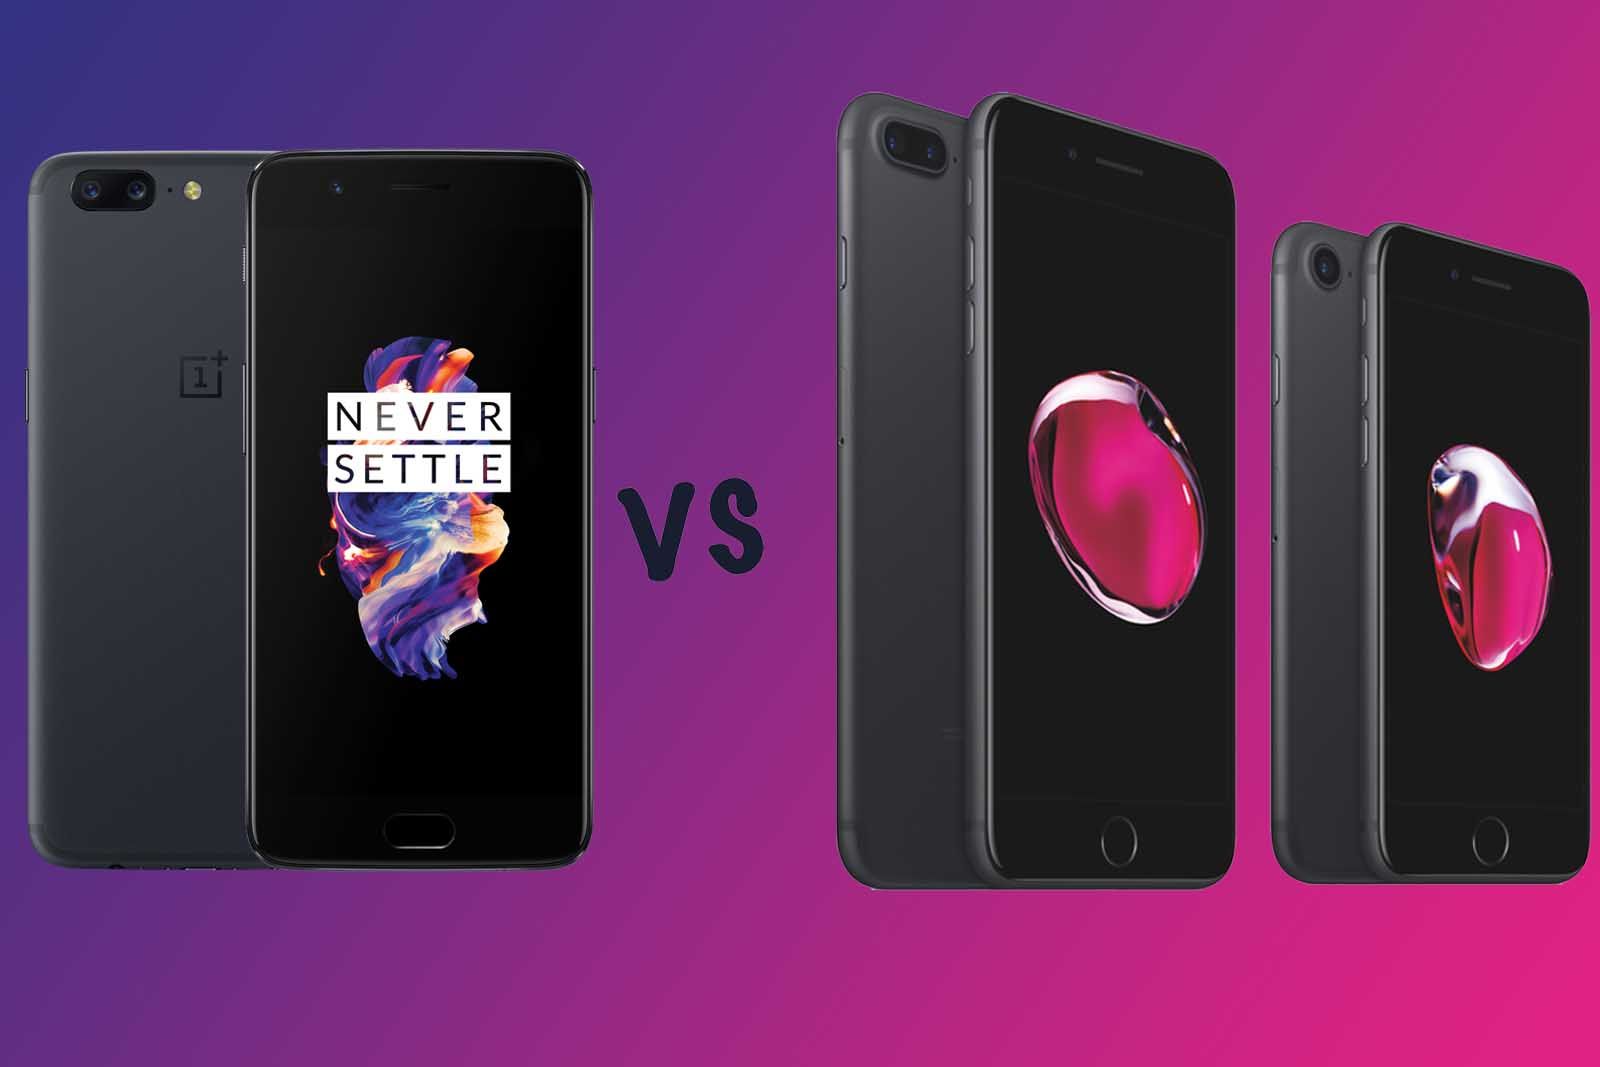 Oneplus 5 Vs Apple Iphone 7 Vs Iphone 7 Plus What S The Rumoured Difference image 1